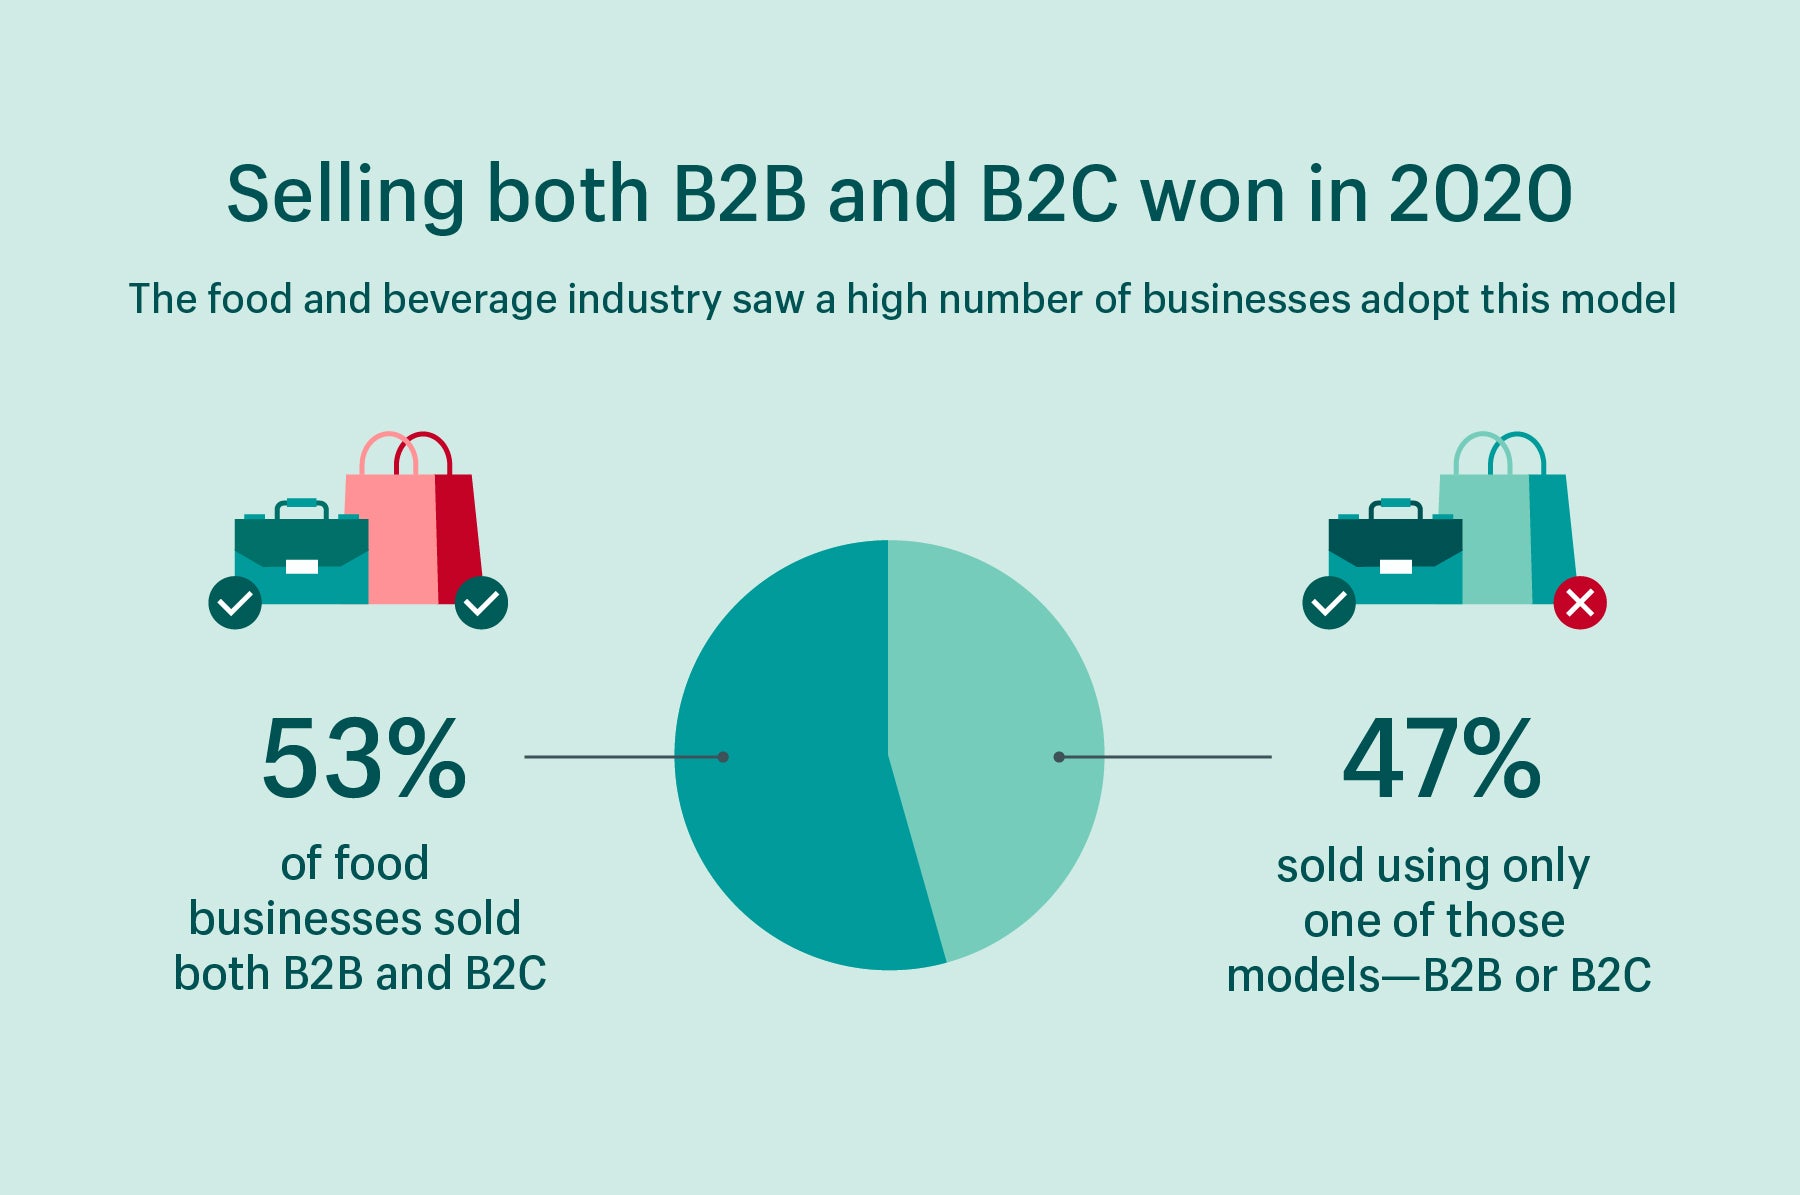 Data visualization showing that 53% of food businesses used both B2C and B2B models in 2020